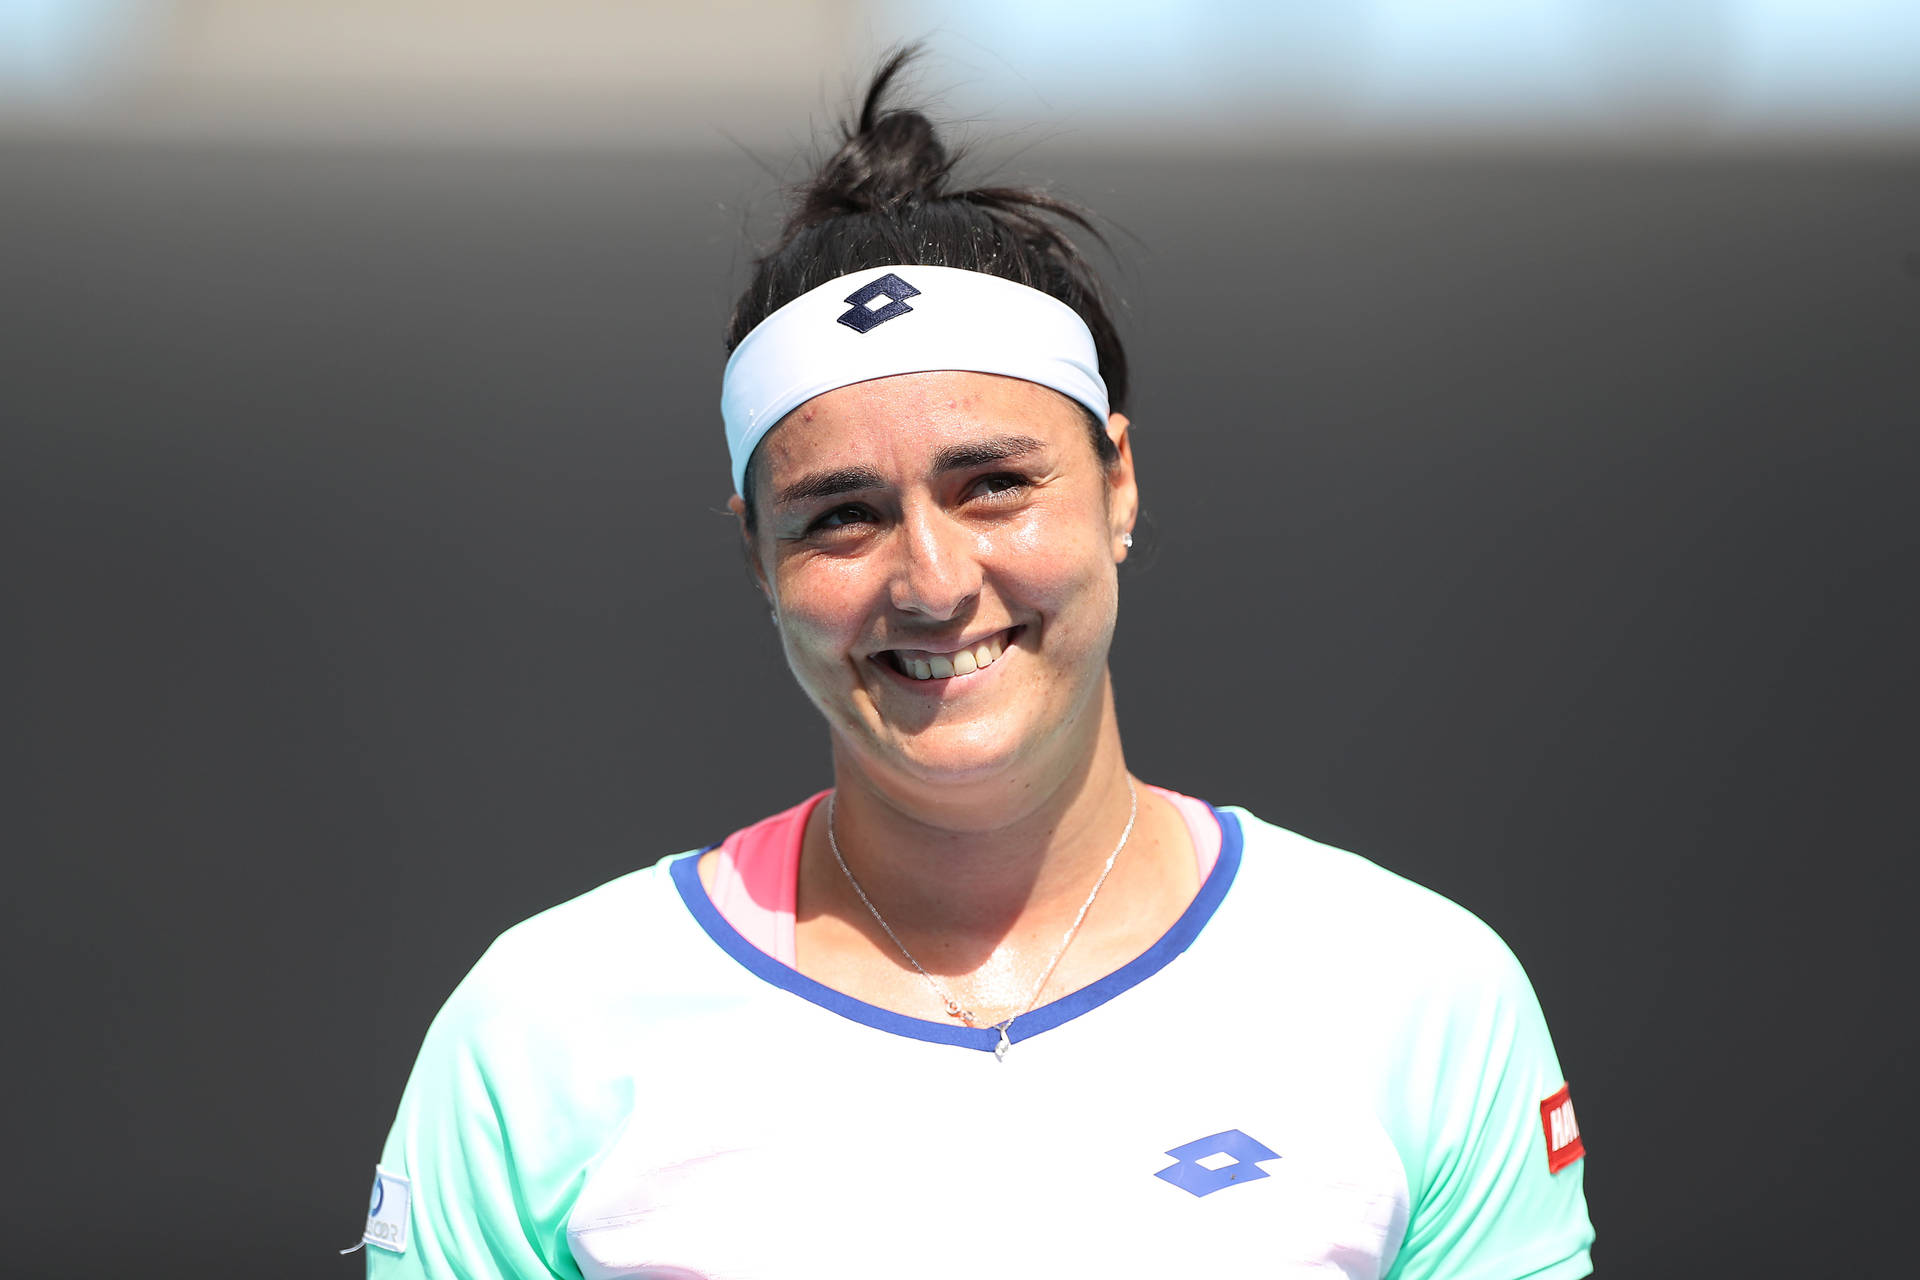 Ons Jabeur, the Successful Tunisian Tennis Star, Lights up the Court with Her Radiant Smile Wallpaper